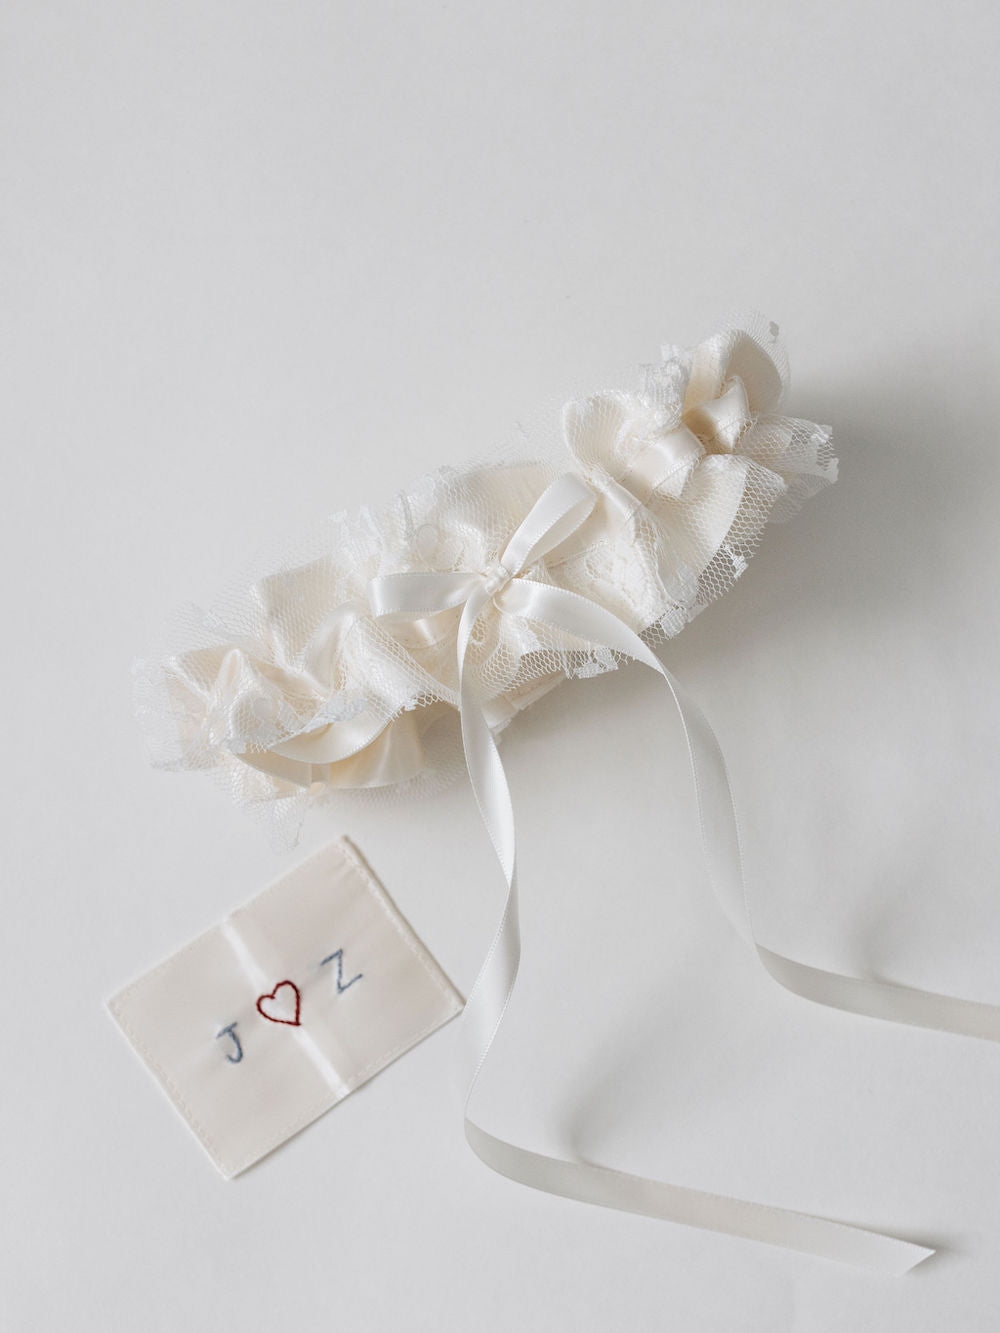 white satin wedding garter with lace overlay and hand-embroidered patch with couple's initials handmade by wedding expert The Garter Girl